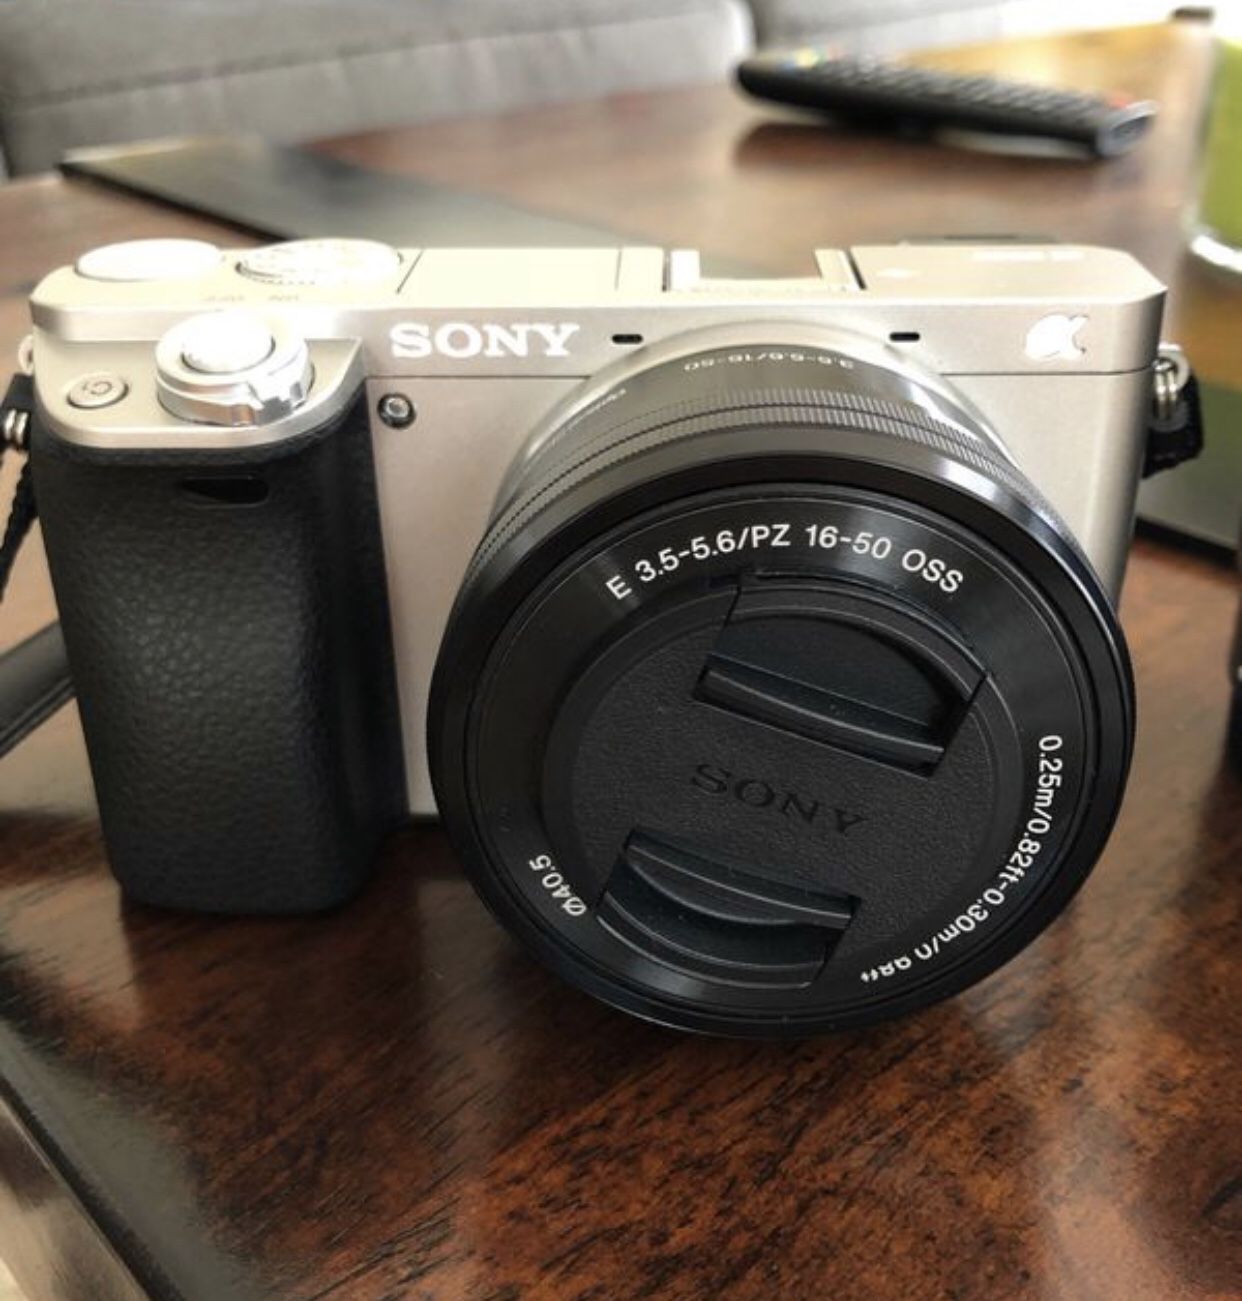 Sony alpha a6000 used once